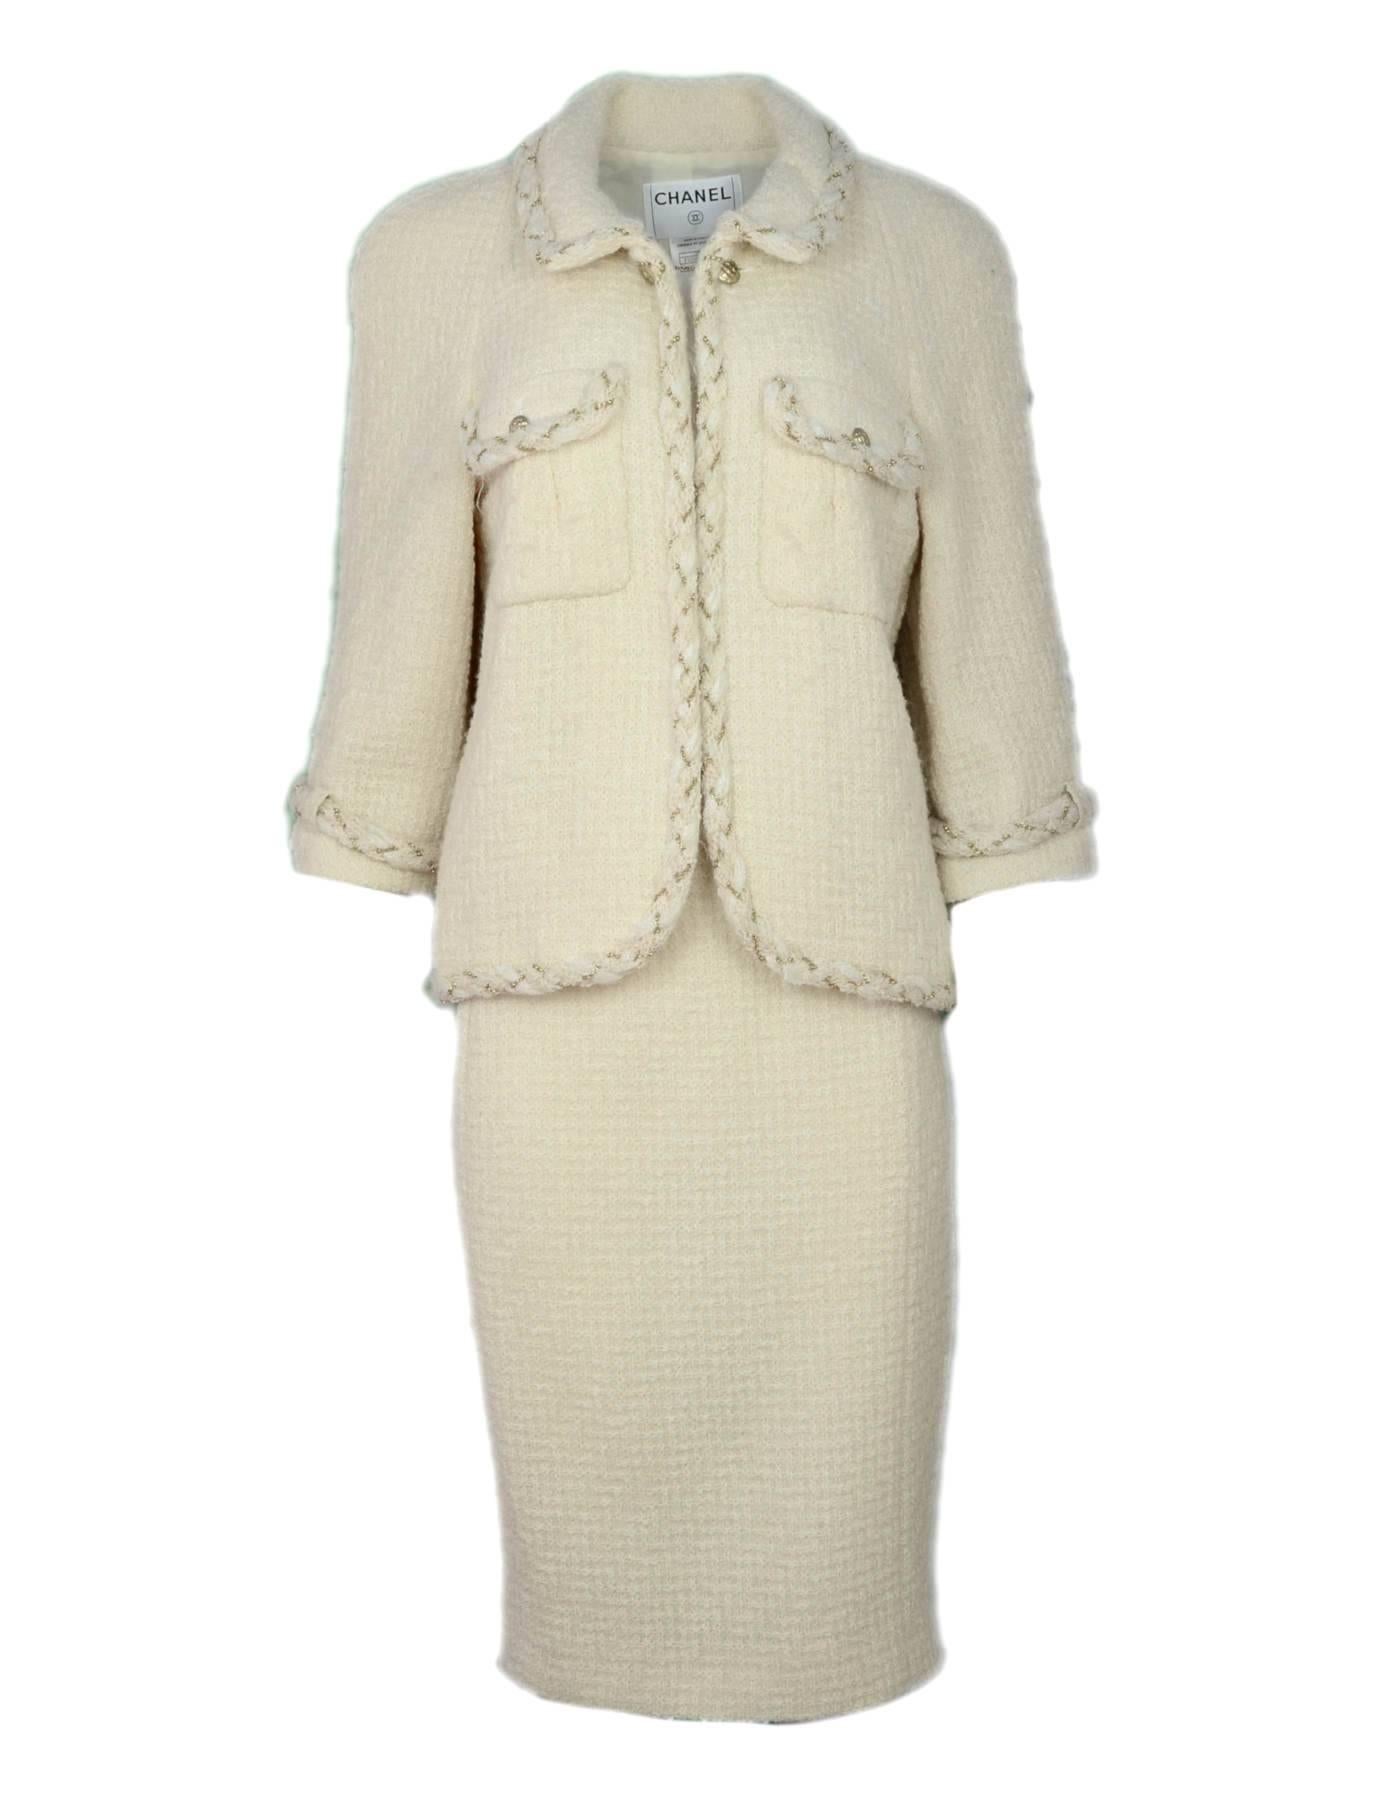 Chanel Cream Wool Jacket Sz FR46
Features goldtone woven chain-link trim

Made In: France
Year of Production: 2007
Color: Cream
Composition: 100% wool
Lining: Beige, 100% silk
Closure/Opening: Neckline button and hook and eye closure
Exterior